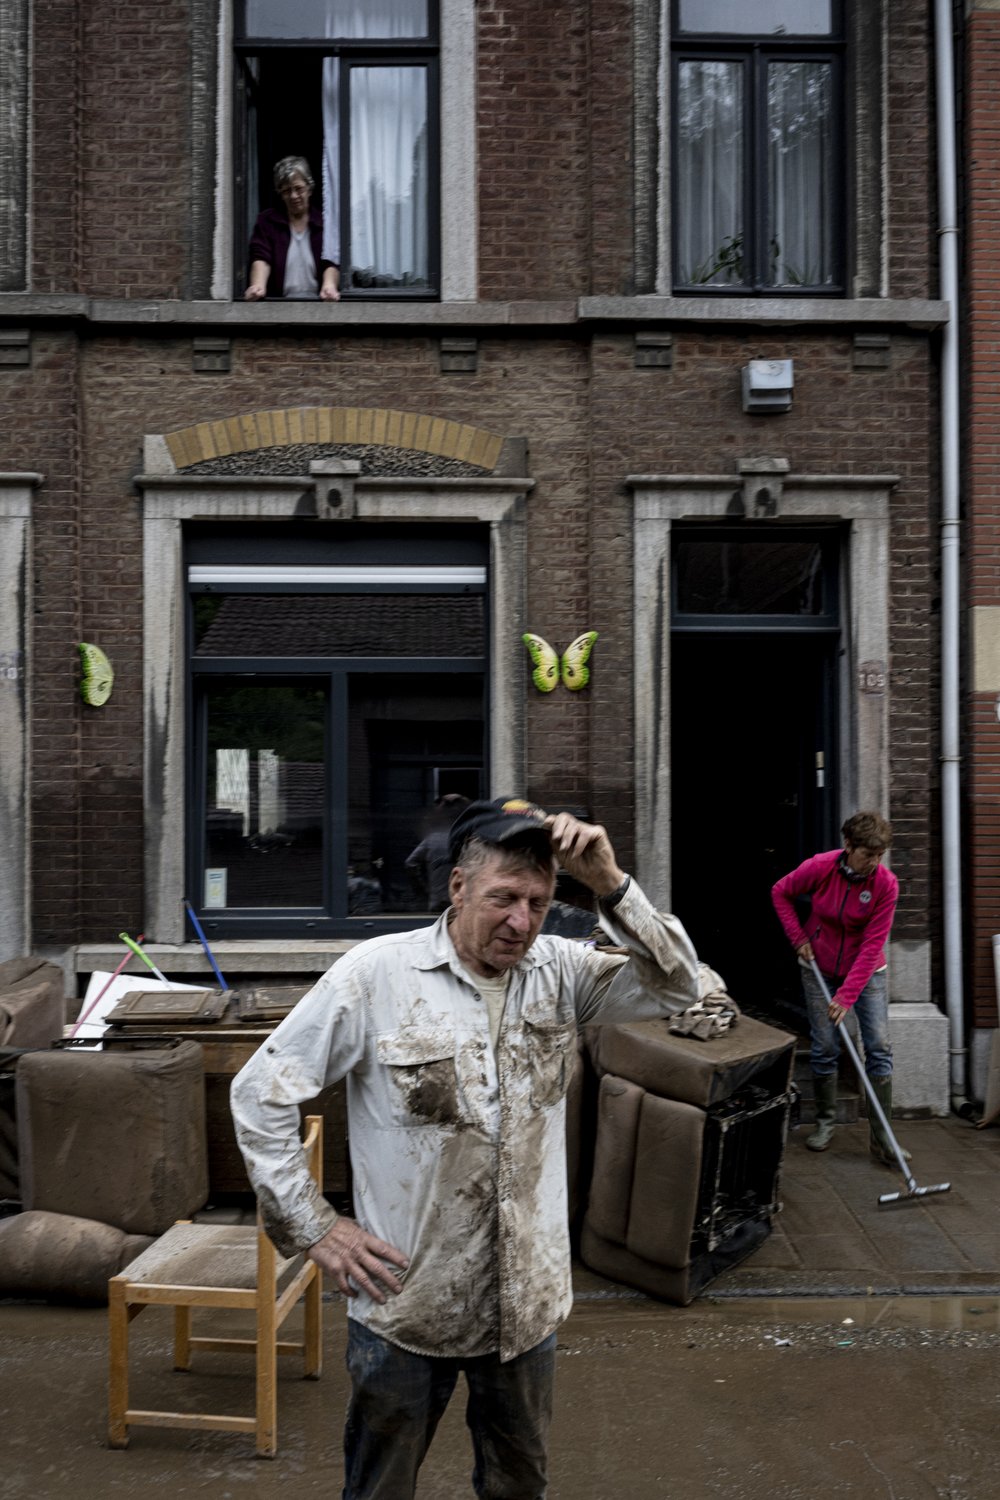  Flooding in Verviers and Pepinster in Belgium on 16 July 2021. Photo by Sébastien Van Malleghem. Families help each other to clean up and remove water damage   